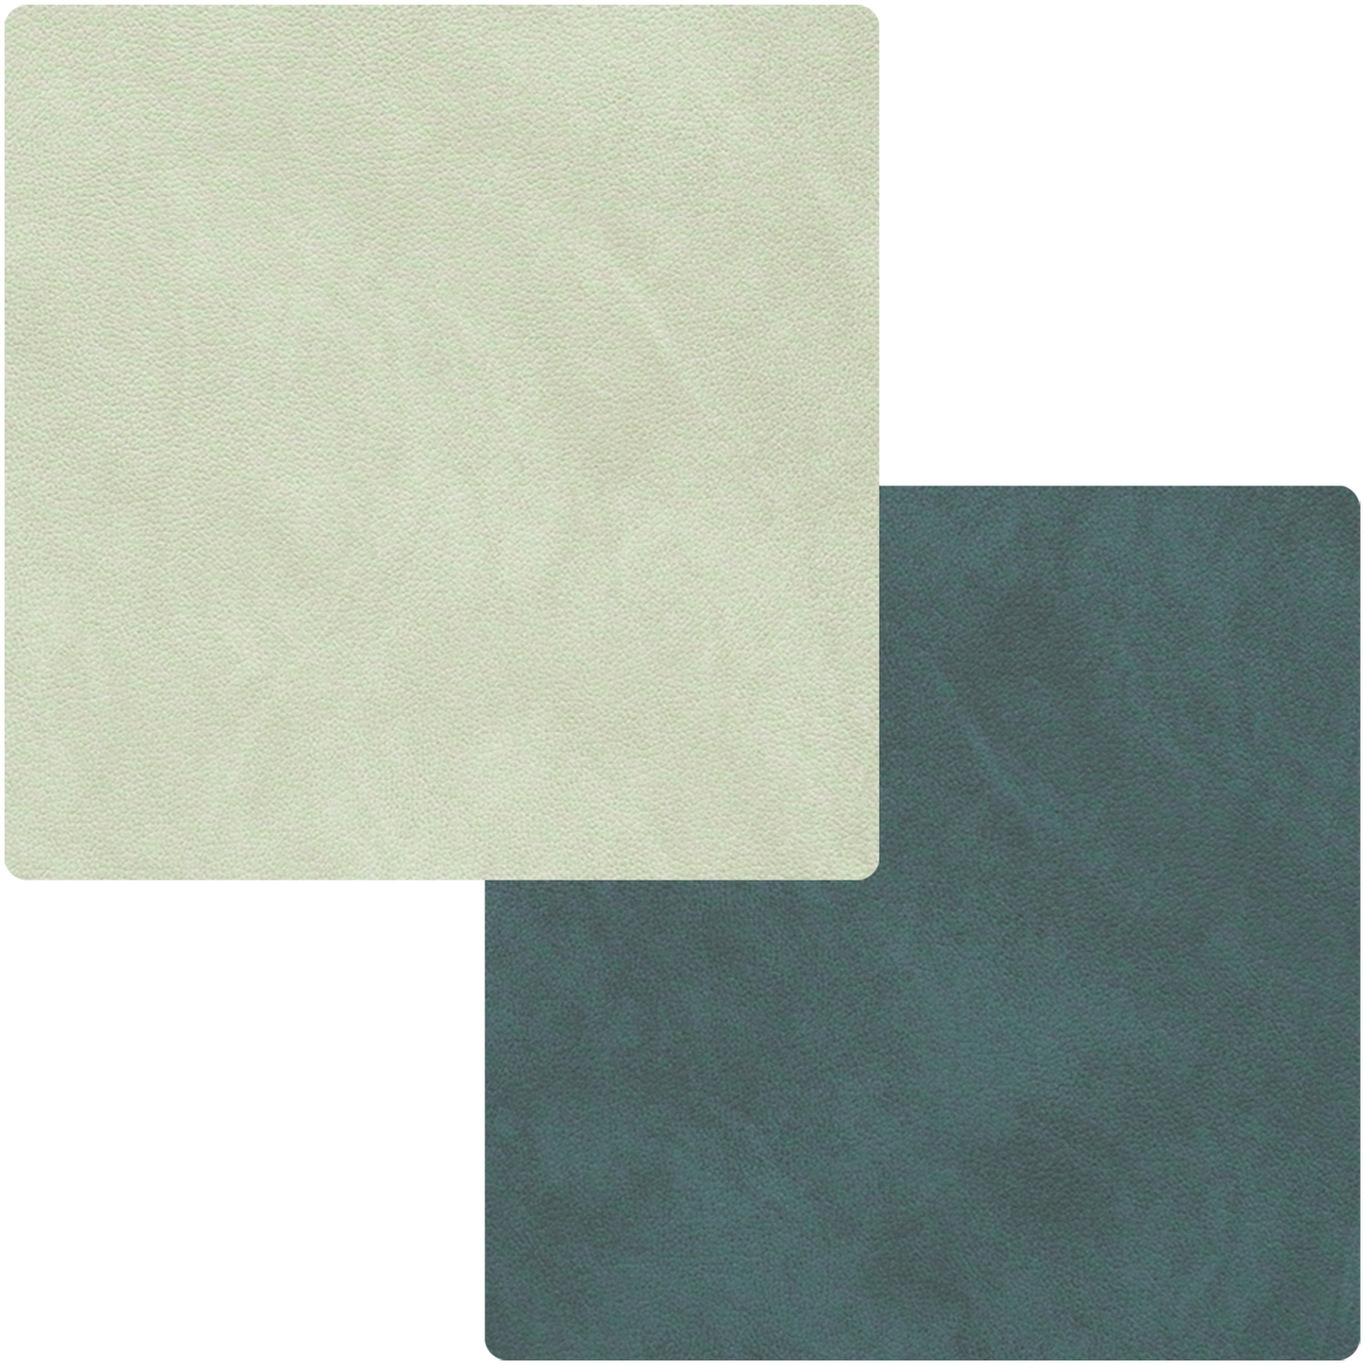 Square Glass Mat Double, 10x10 cm, Dark Green/Olive Green